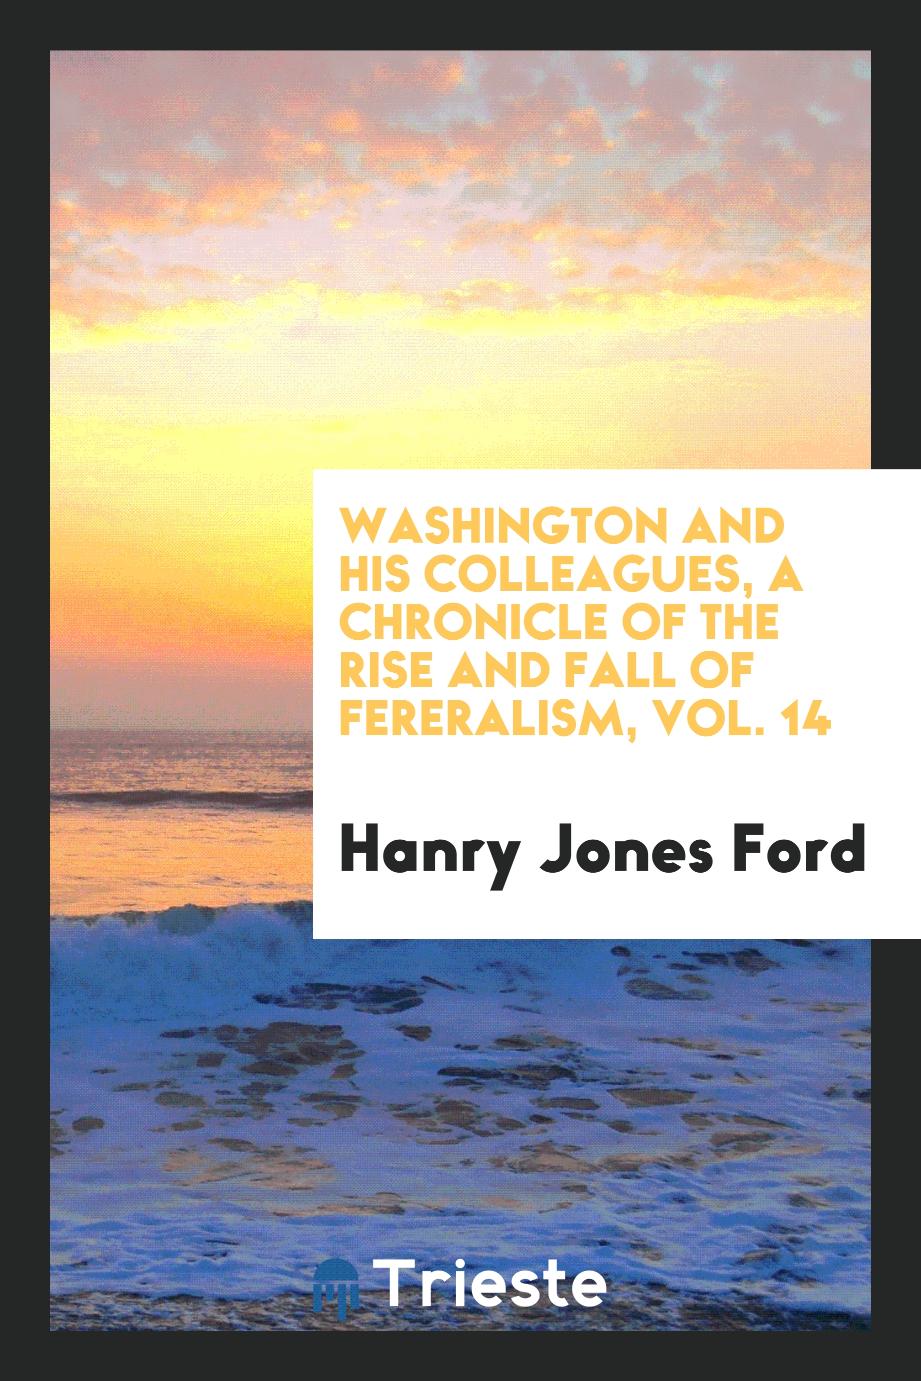 Washington and his colleagues, a chronicle of the rise and fall of fereralism, Vol. 14